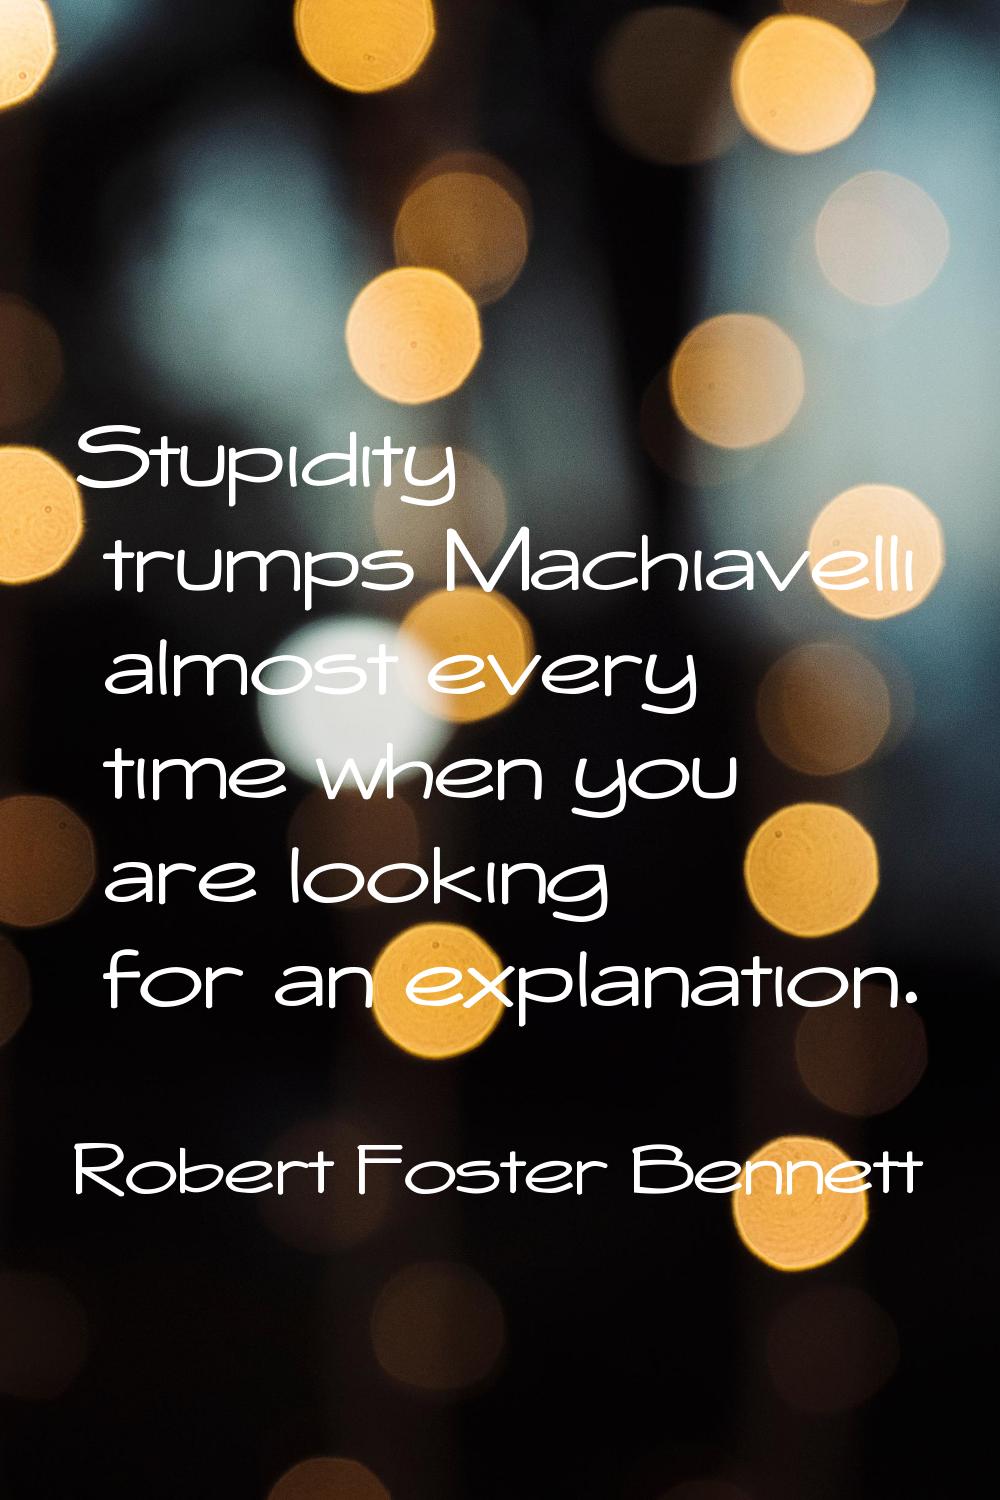 Stupidity trumps Machiavelli almost every time when you are looking for an explanation.